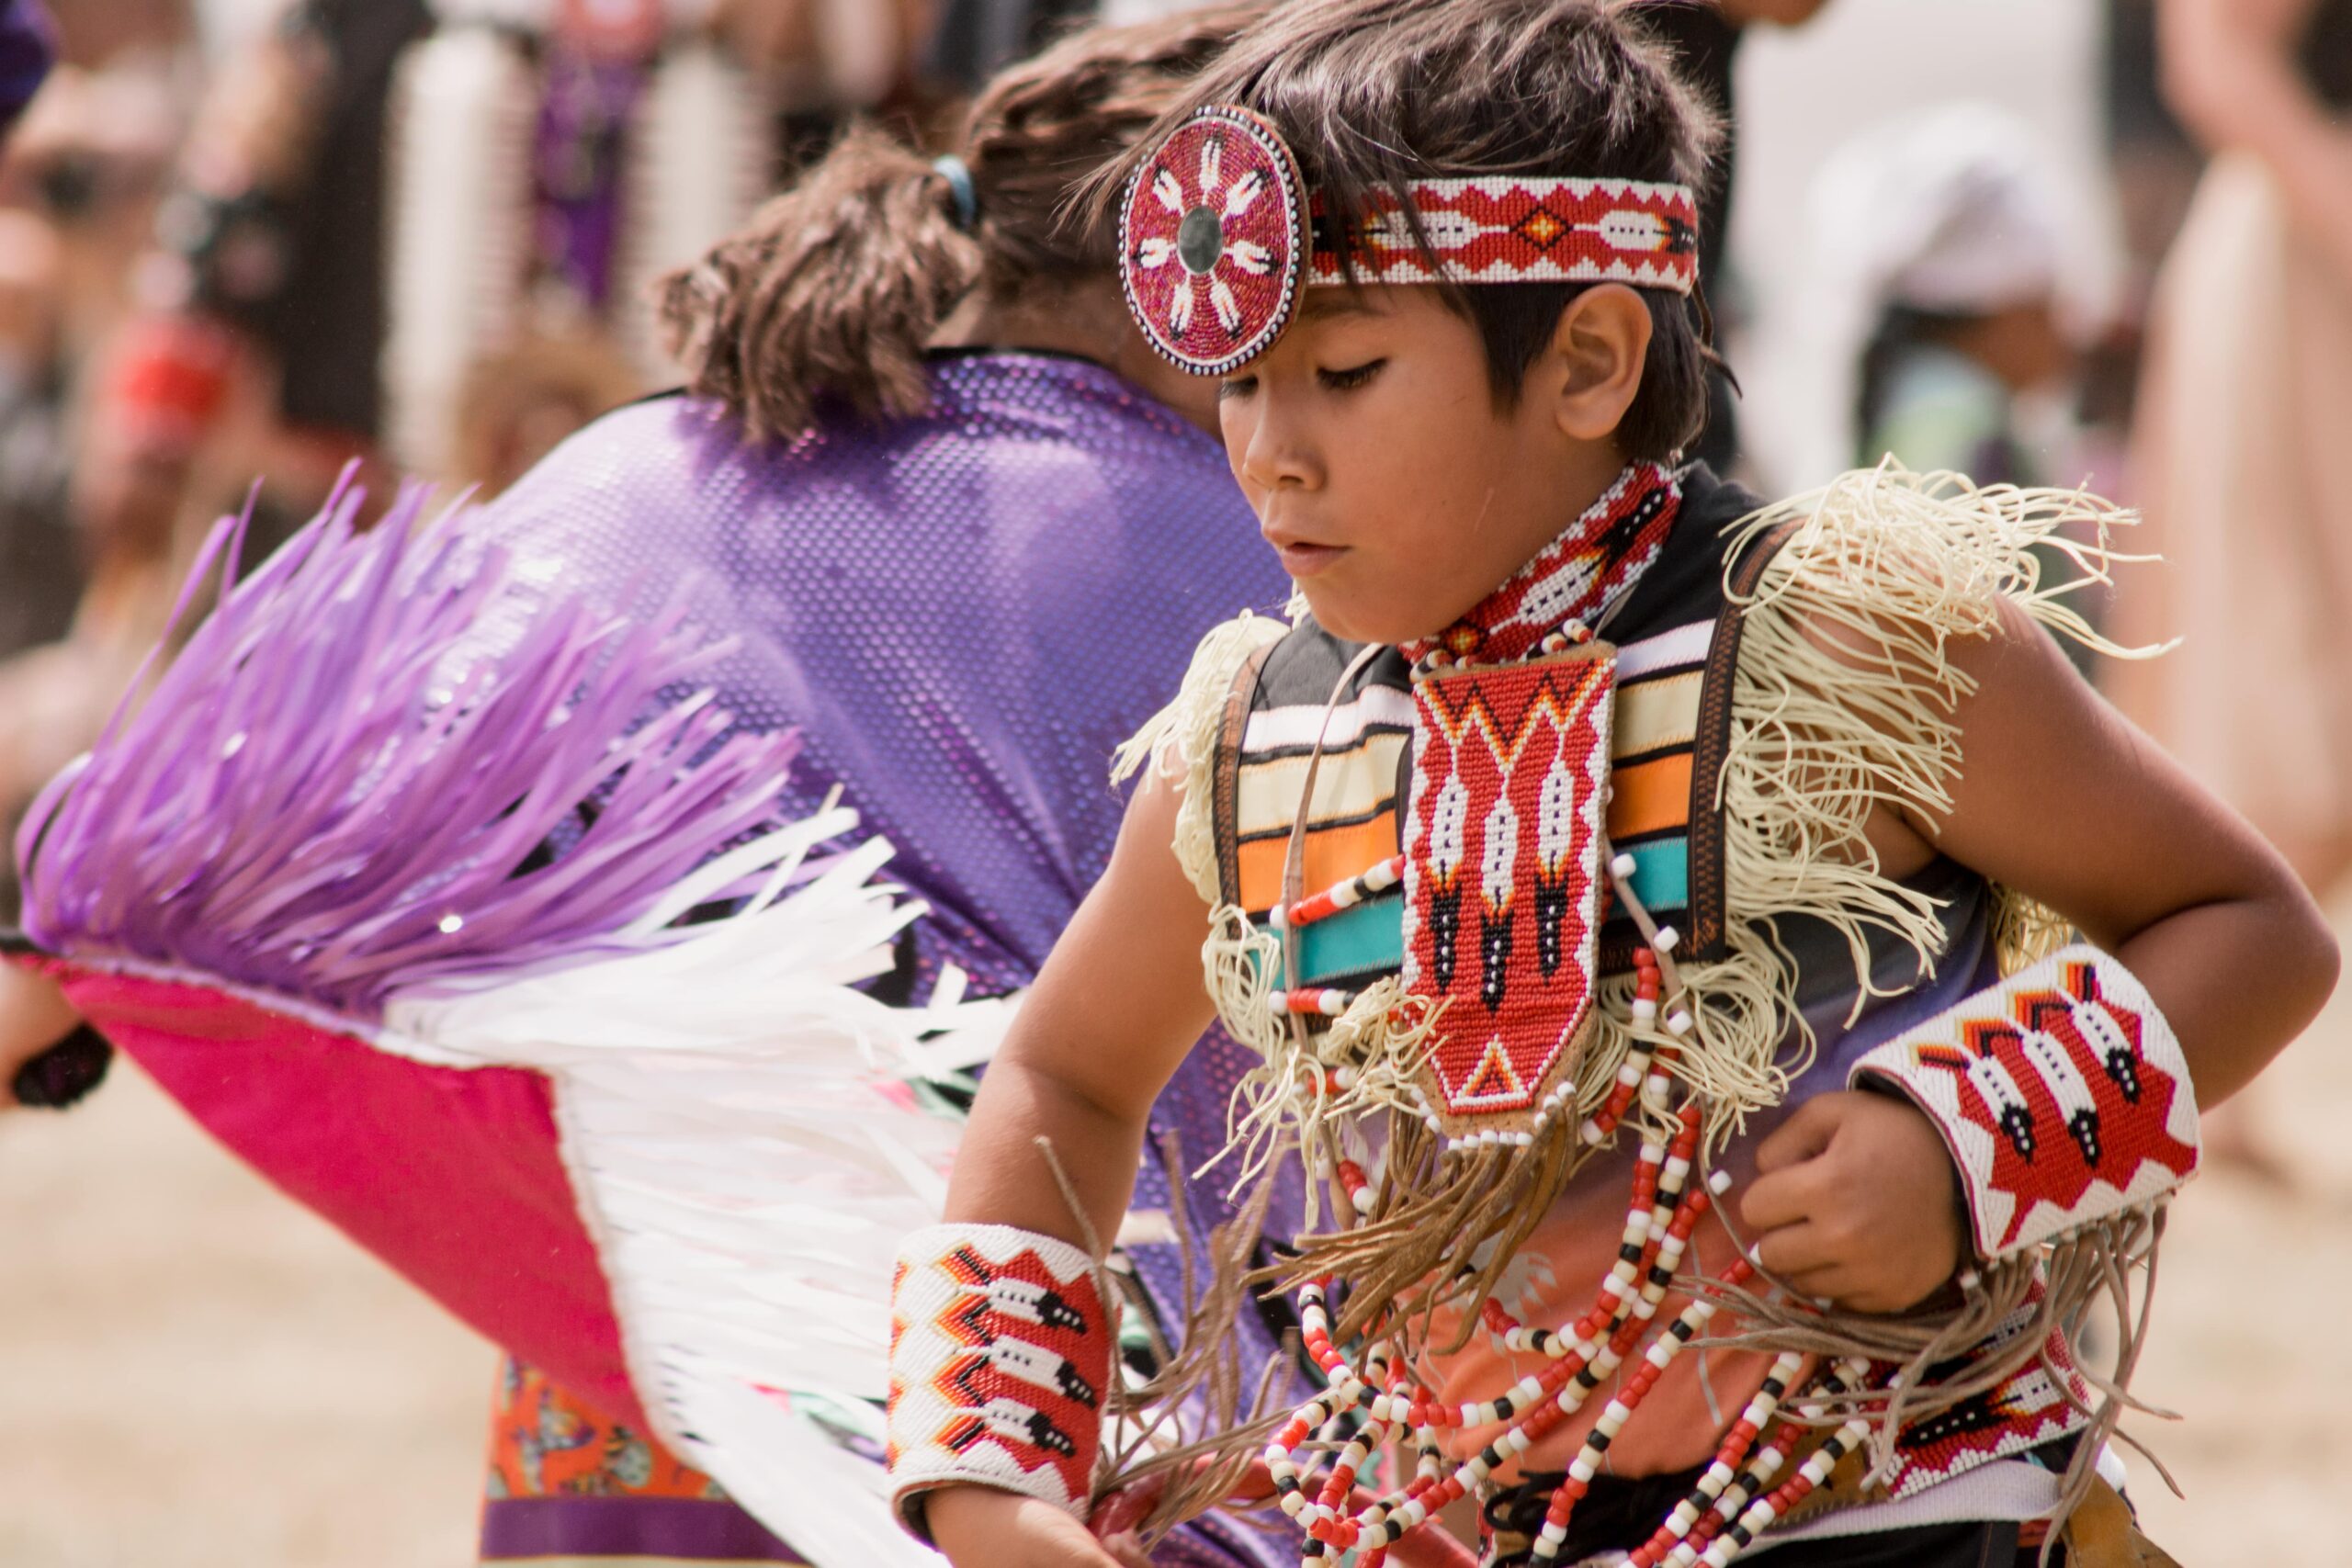 A young child dressed in Indigenous regalia takes part in a performance.